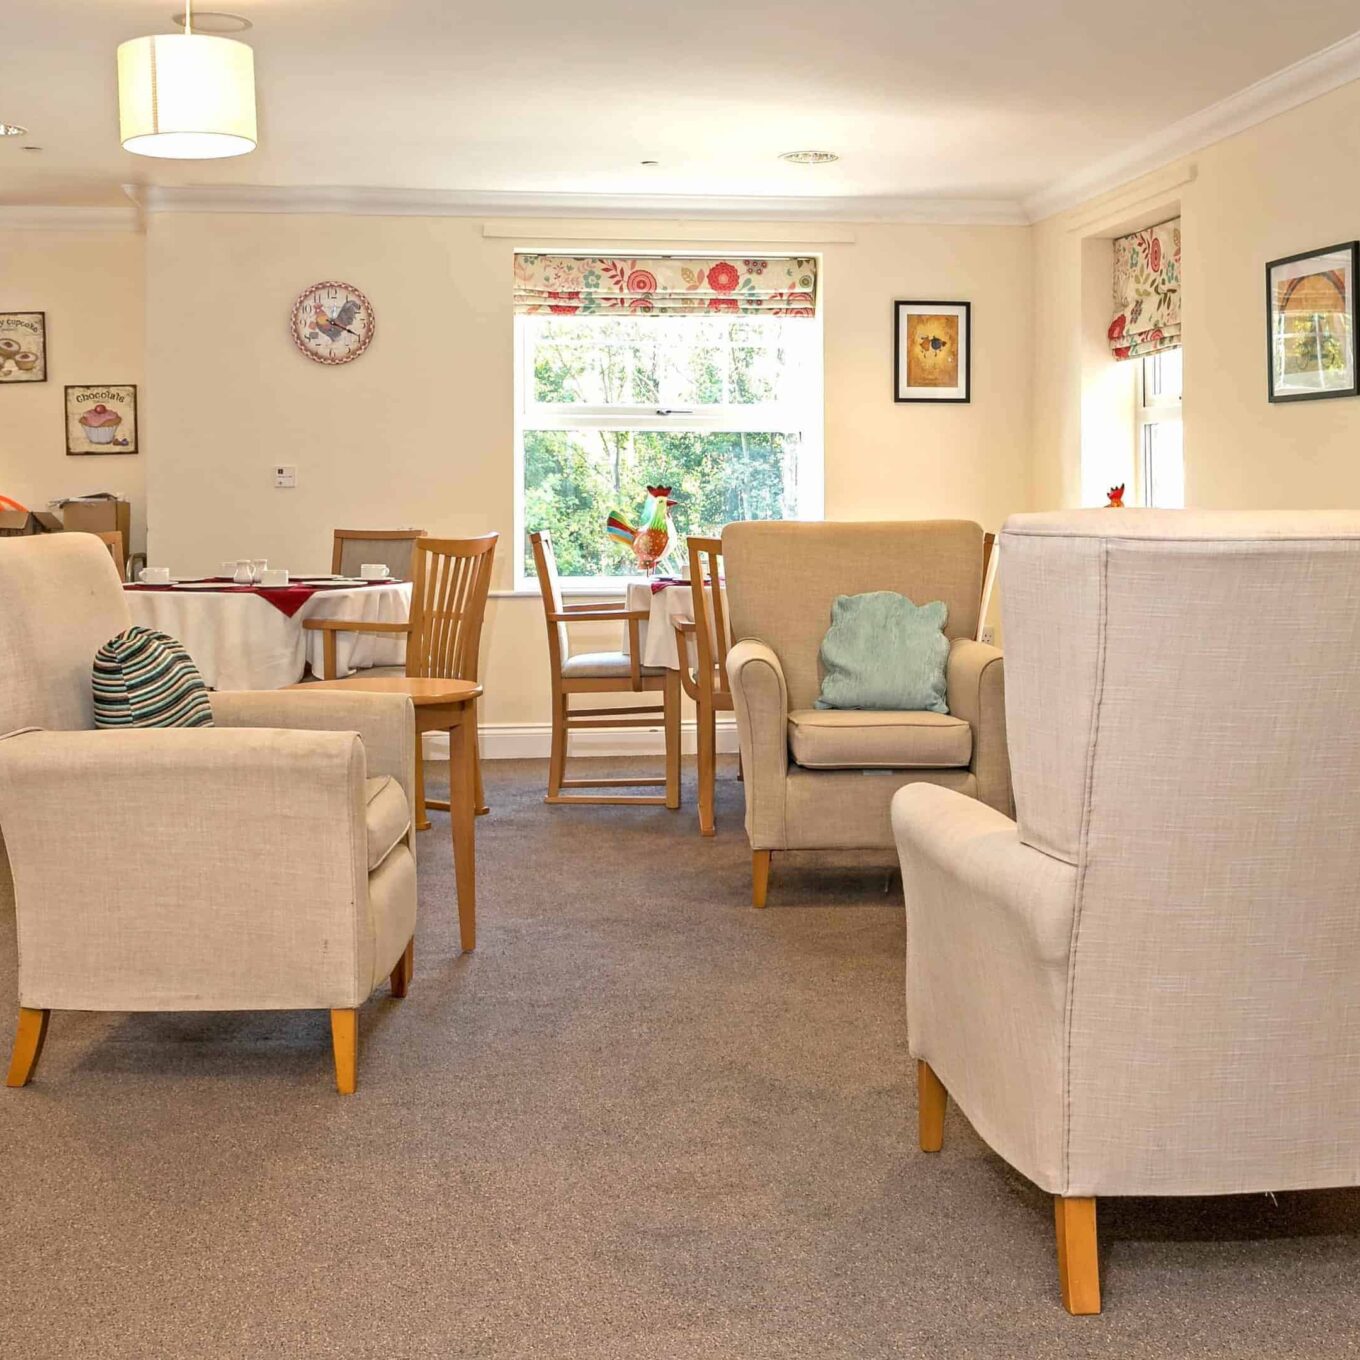 Lounge area with TV at Woodland Grove Care Home in Loughton